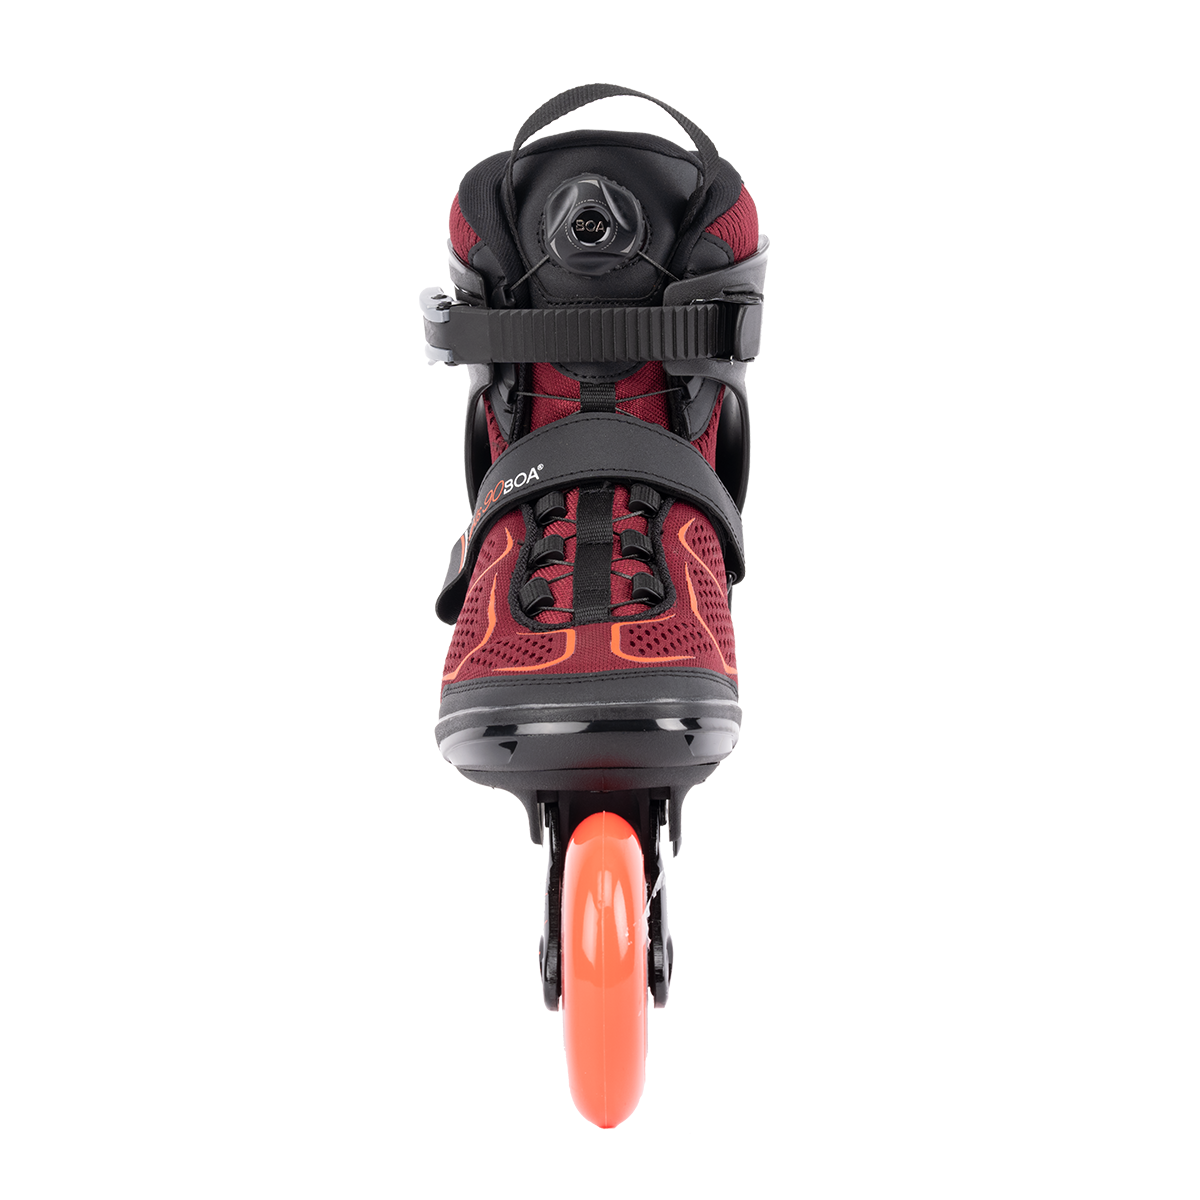 A front view of the K2 Alexis 90 Boa inline skate.